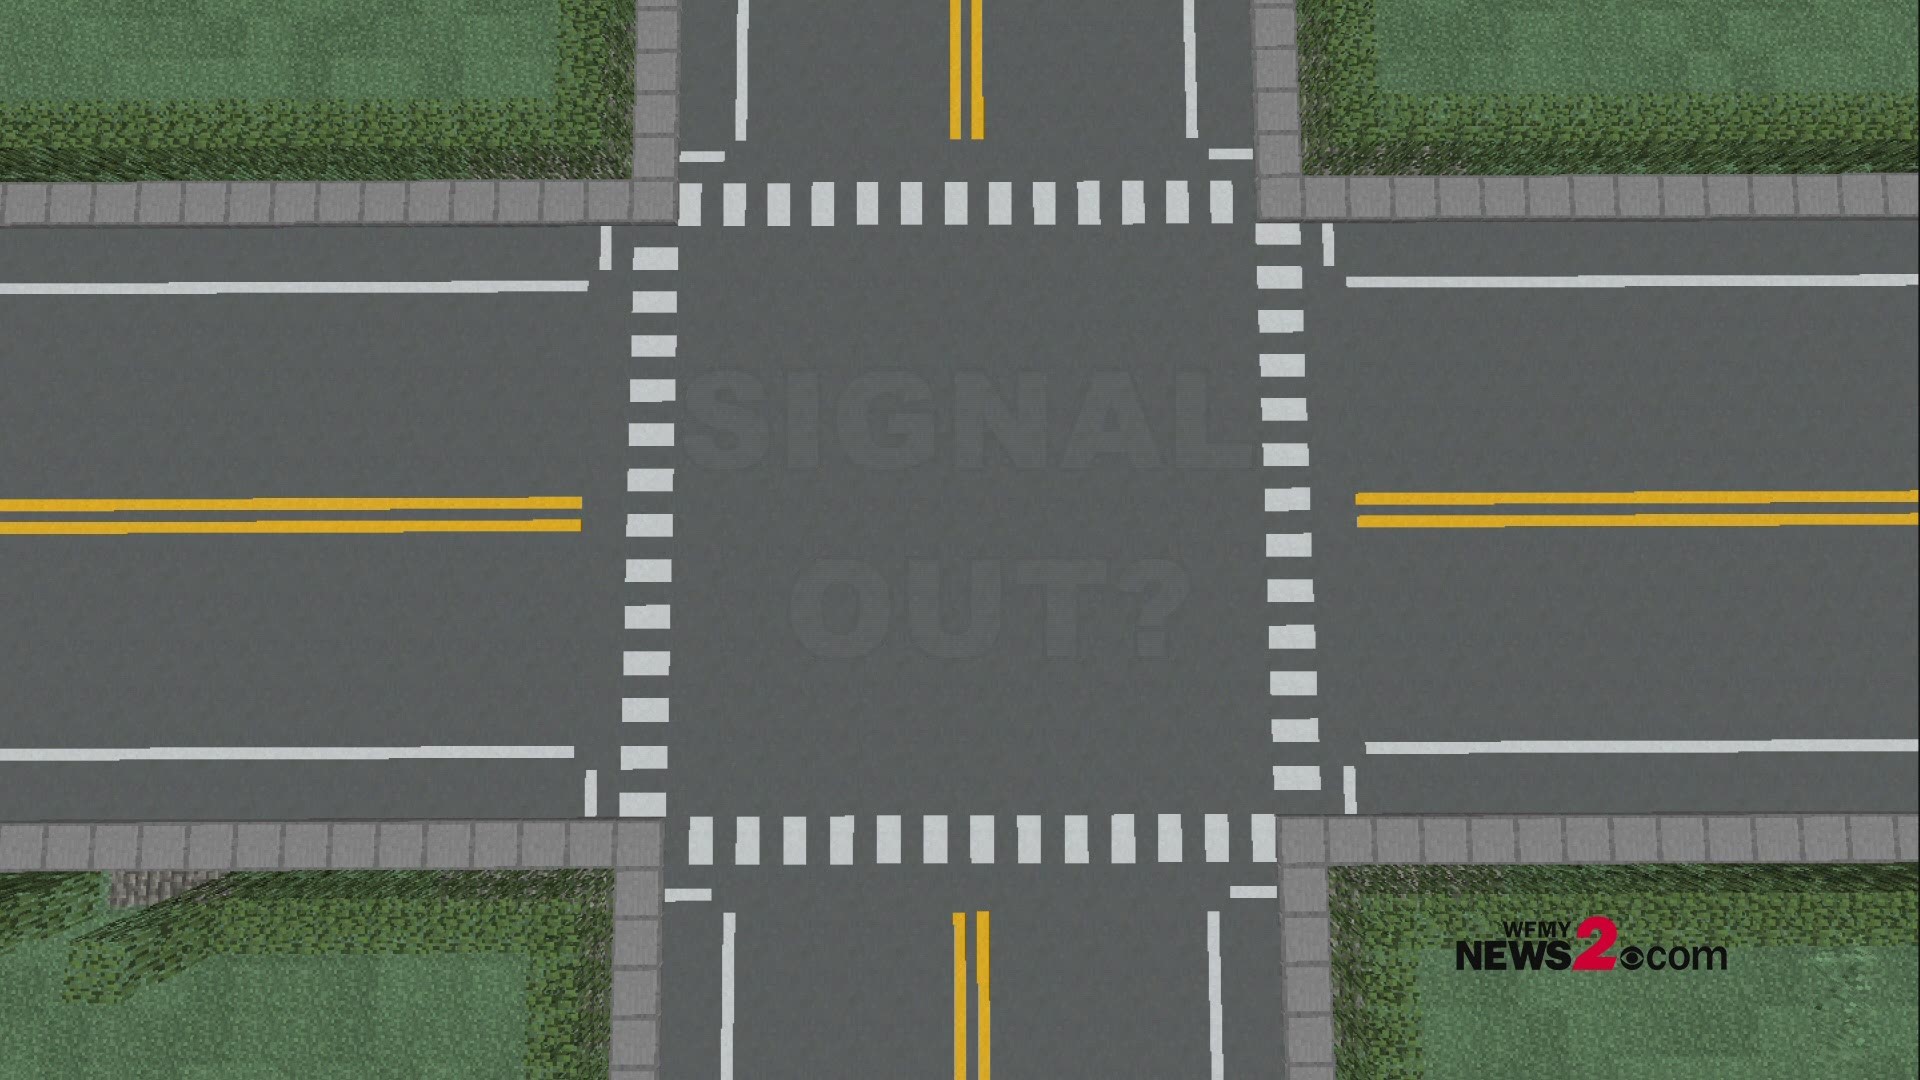 When an intersection doesn't have a working stop light the four-way stop plan comes into play. Here's how to safely navigate and show etiquette in a four-way stop.